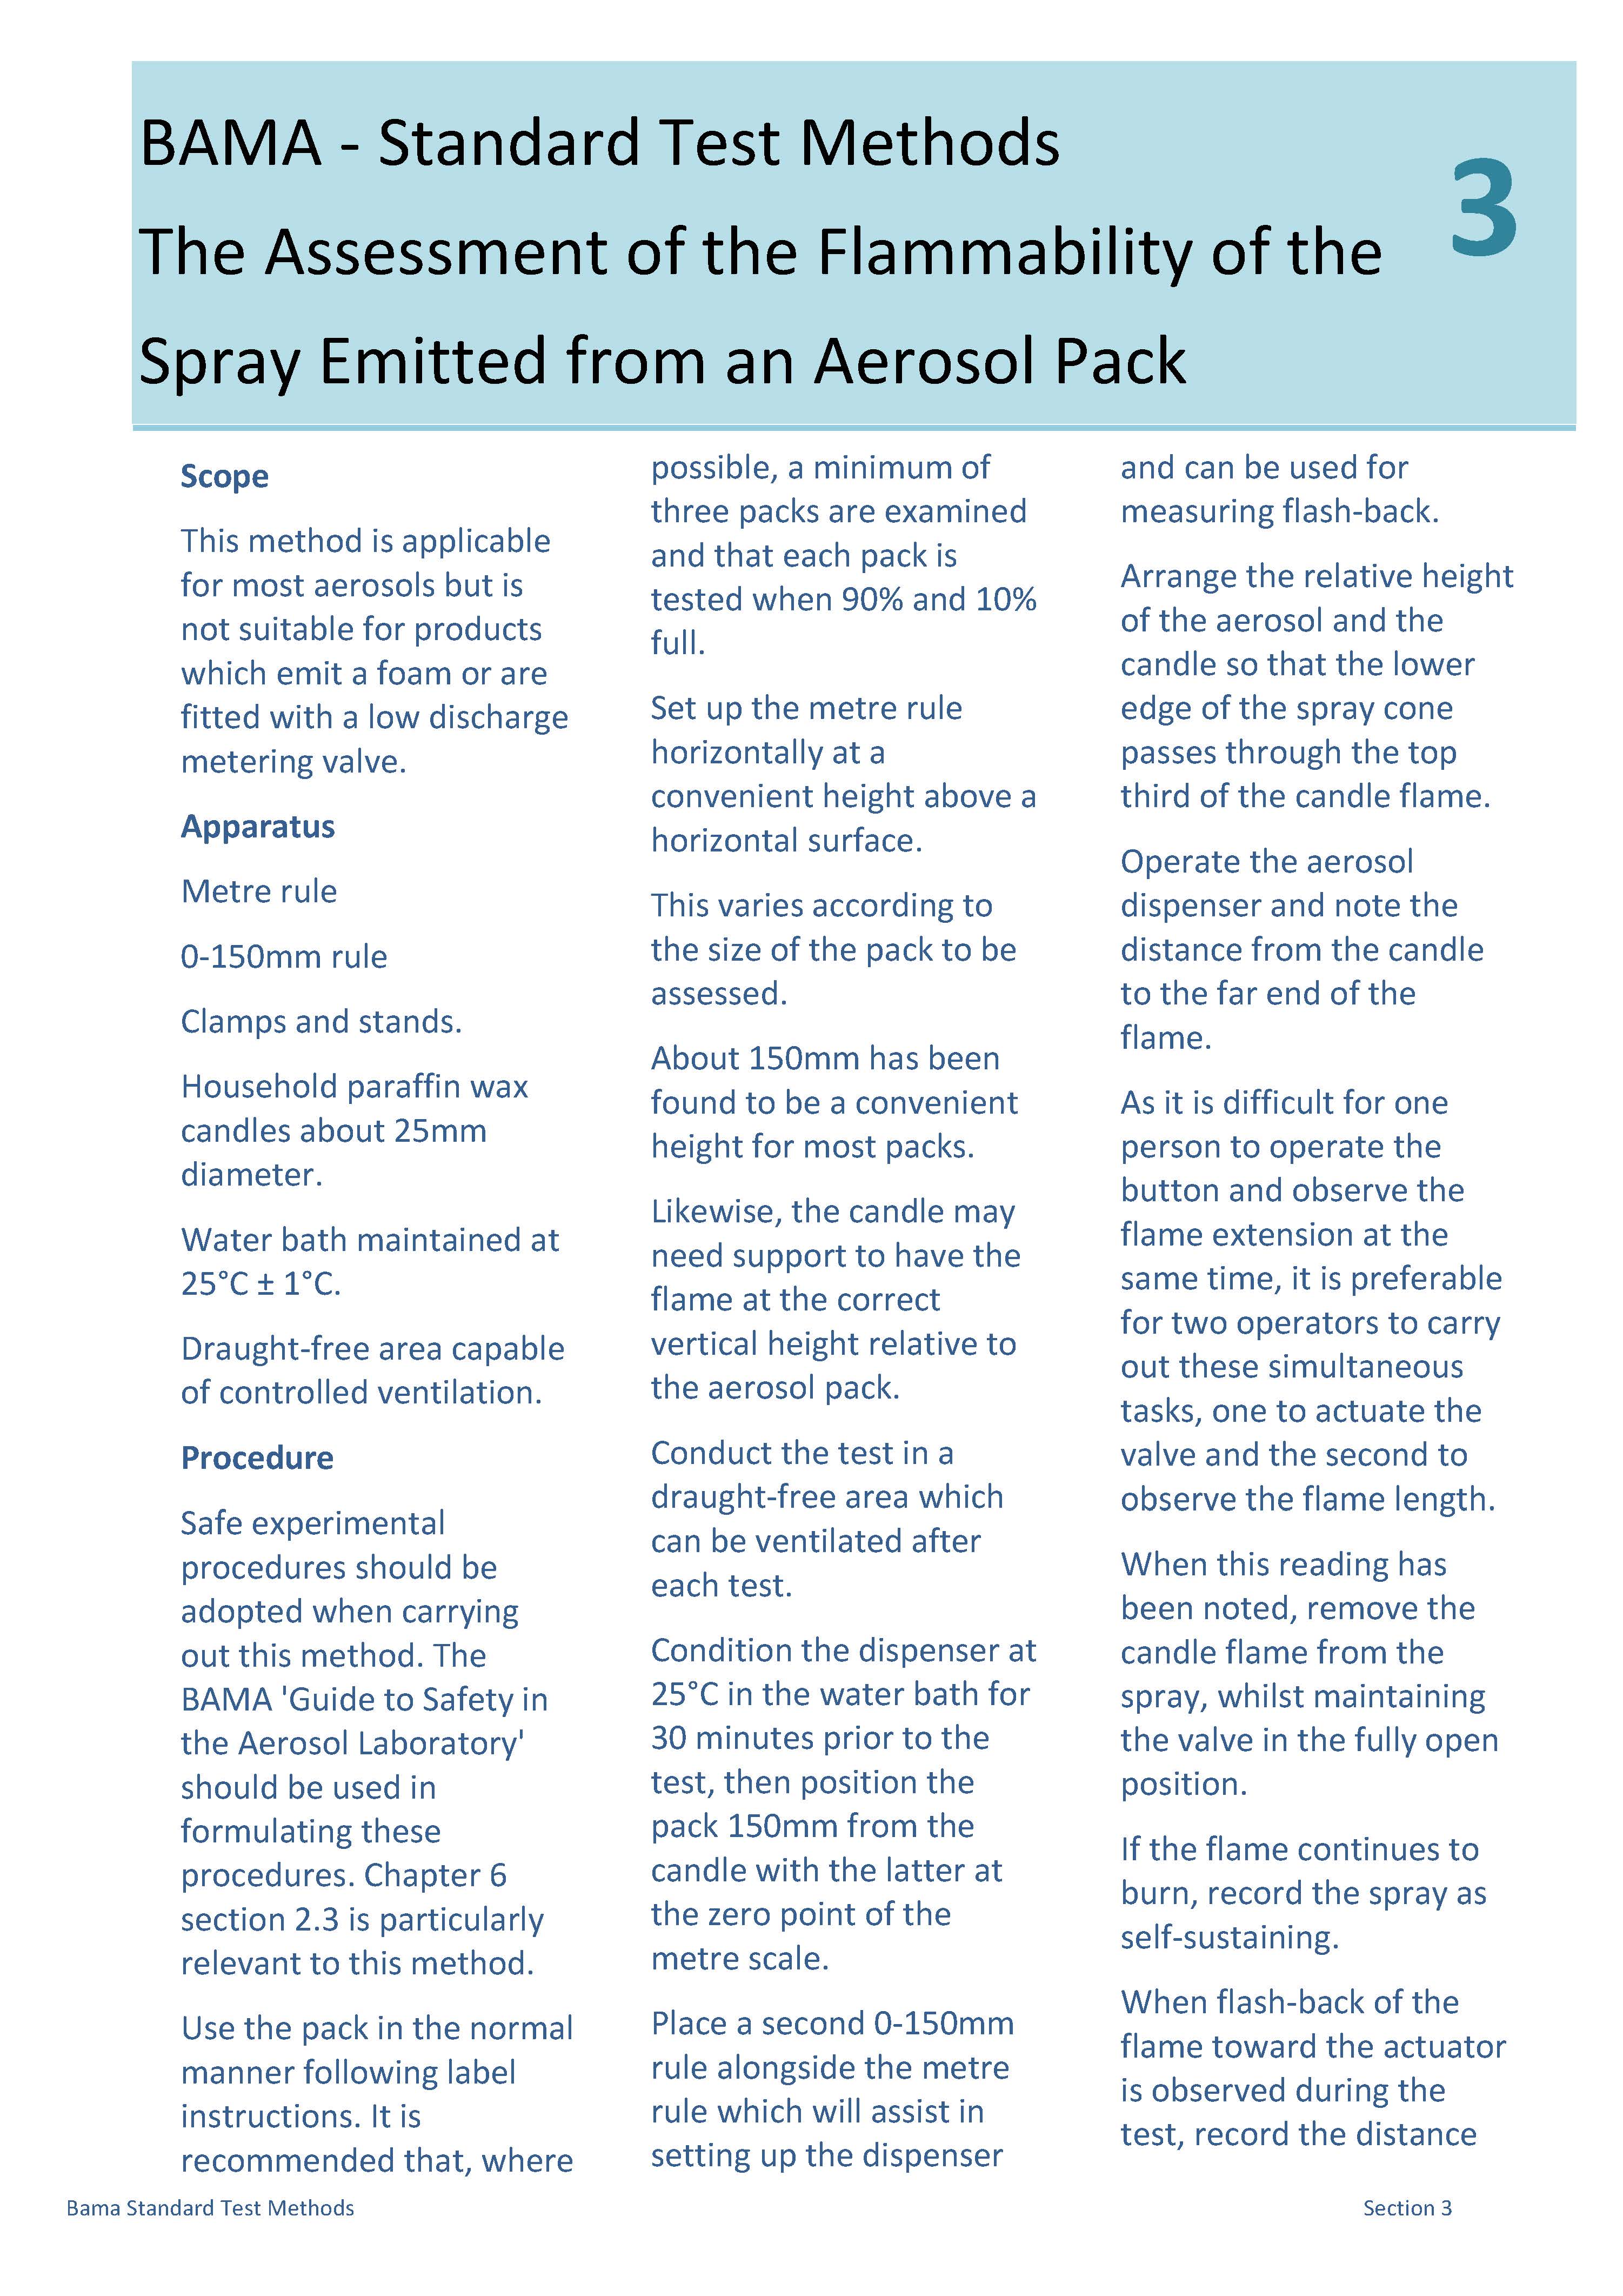 3 - The Assessment of the Flammability of the Spray Emitted from an Aerosol Pack